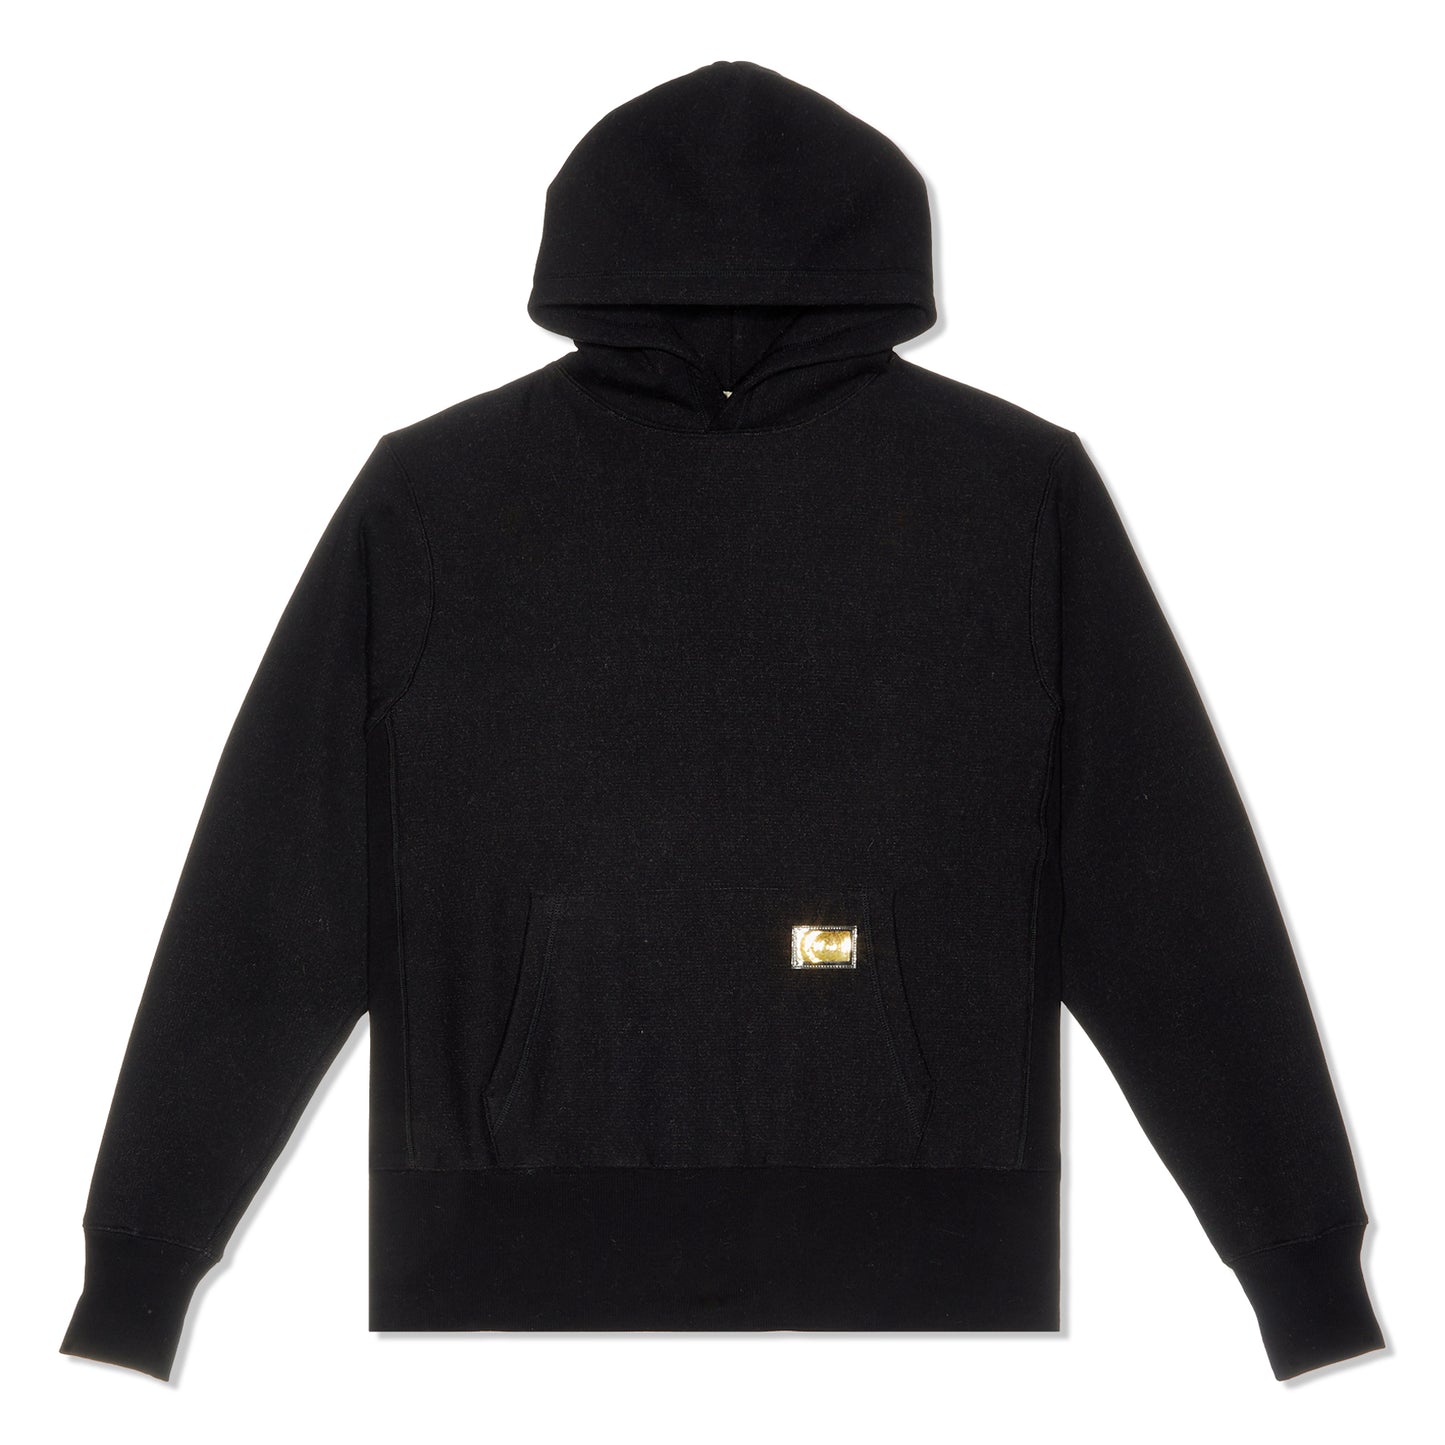 Advisory Board Crystals Abc 123 Pullover Hoodie (Black)